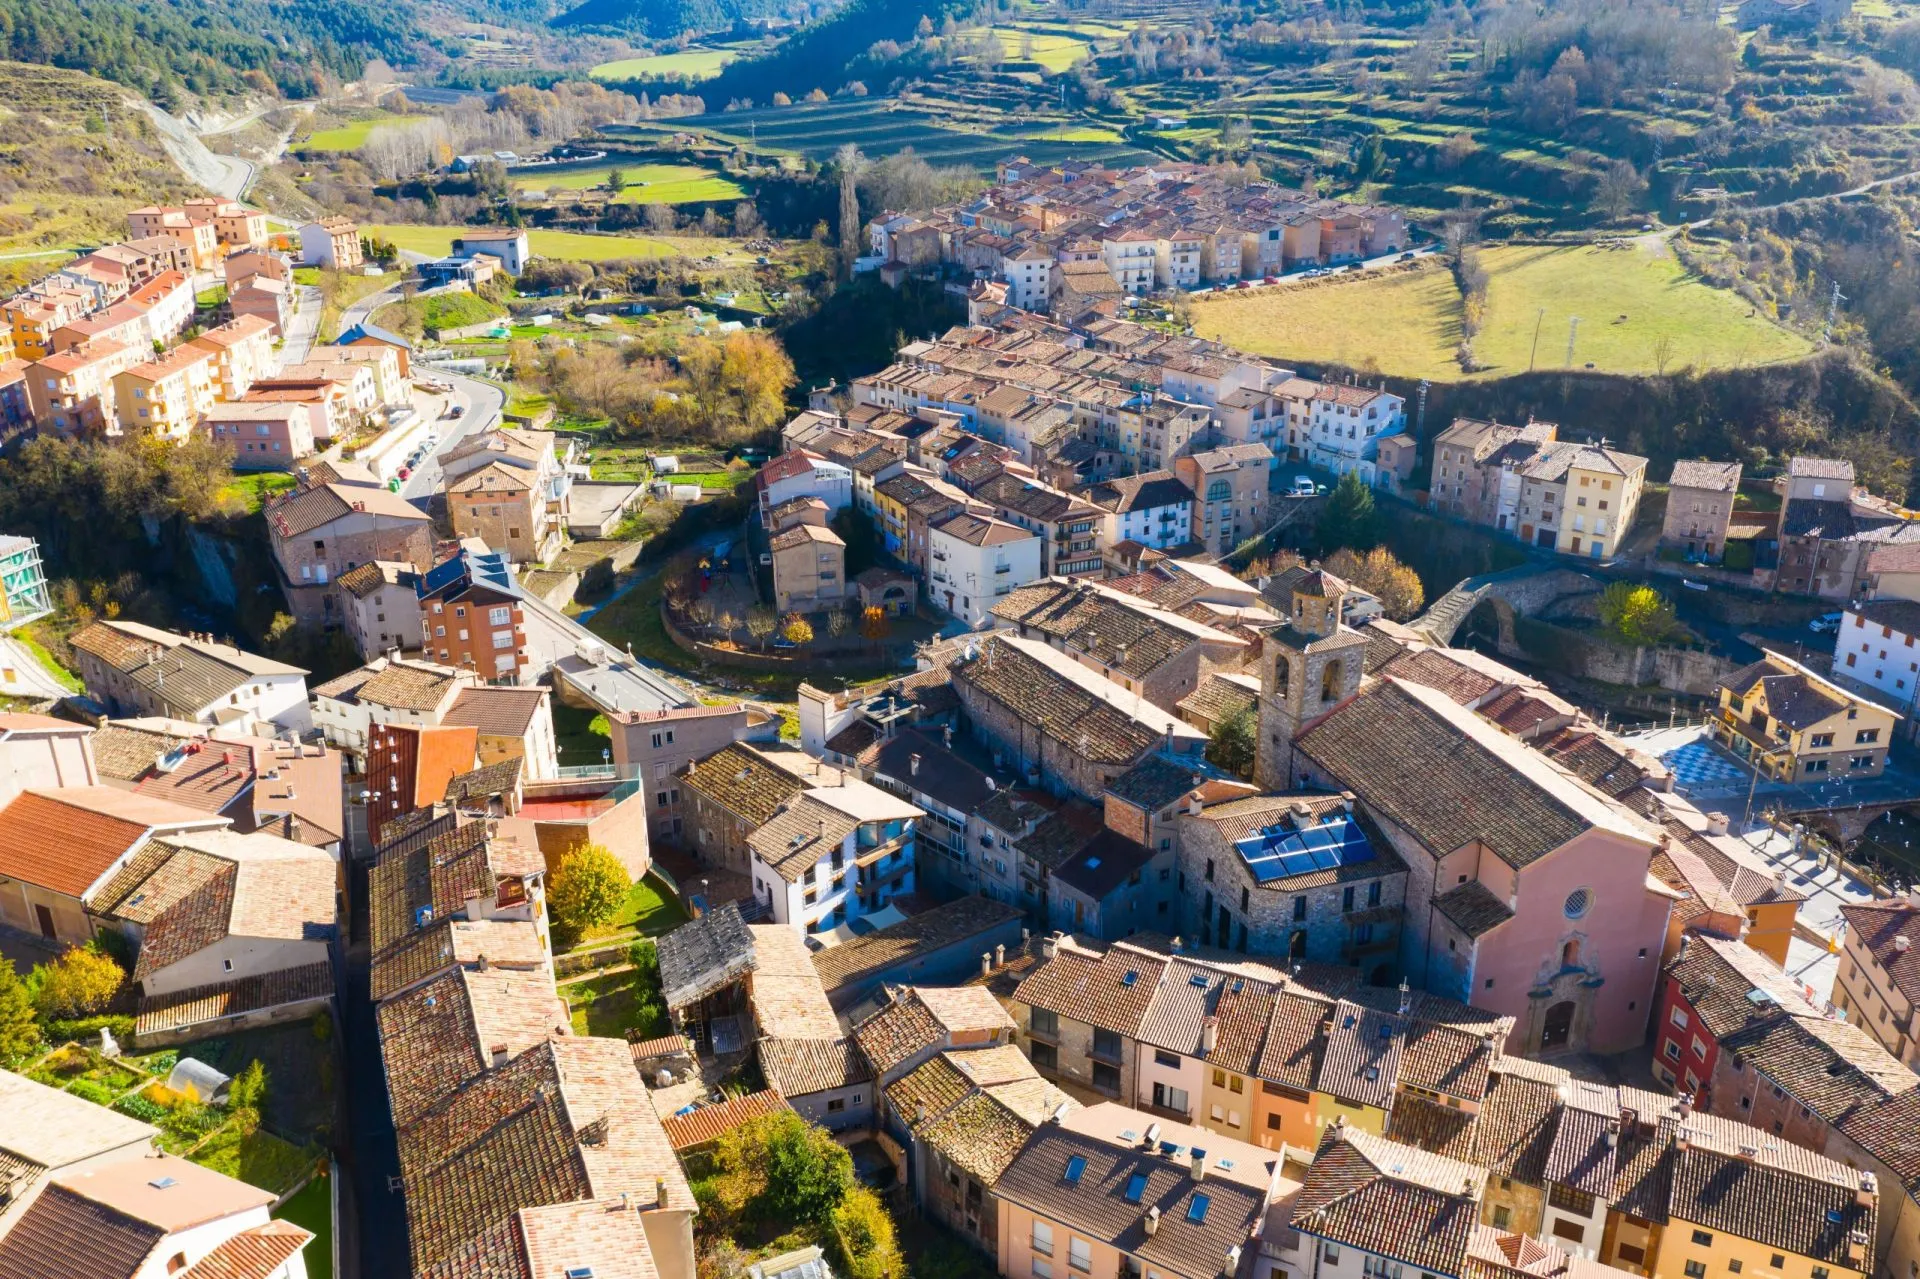 Scenic aerial view of small Spanish town of La Pobla de Lillet at foot of Pyrenees mountains on sunny fall day, Catalonia